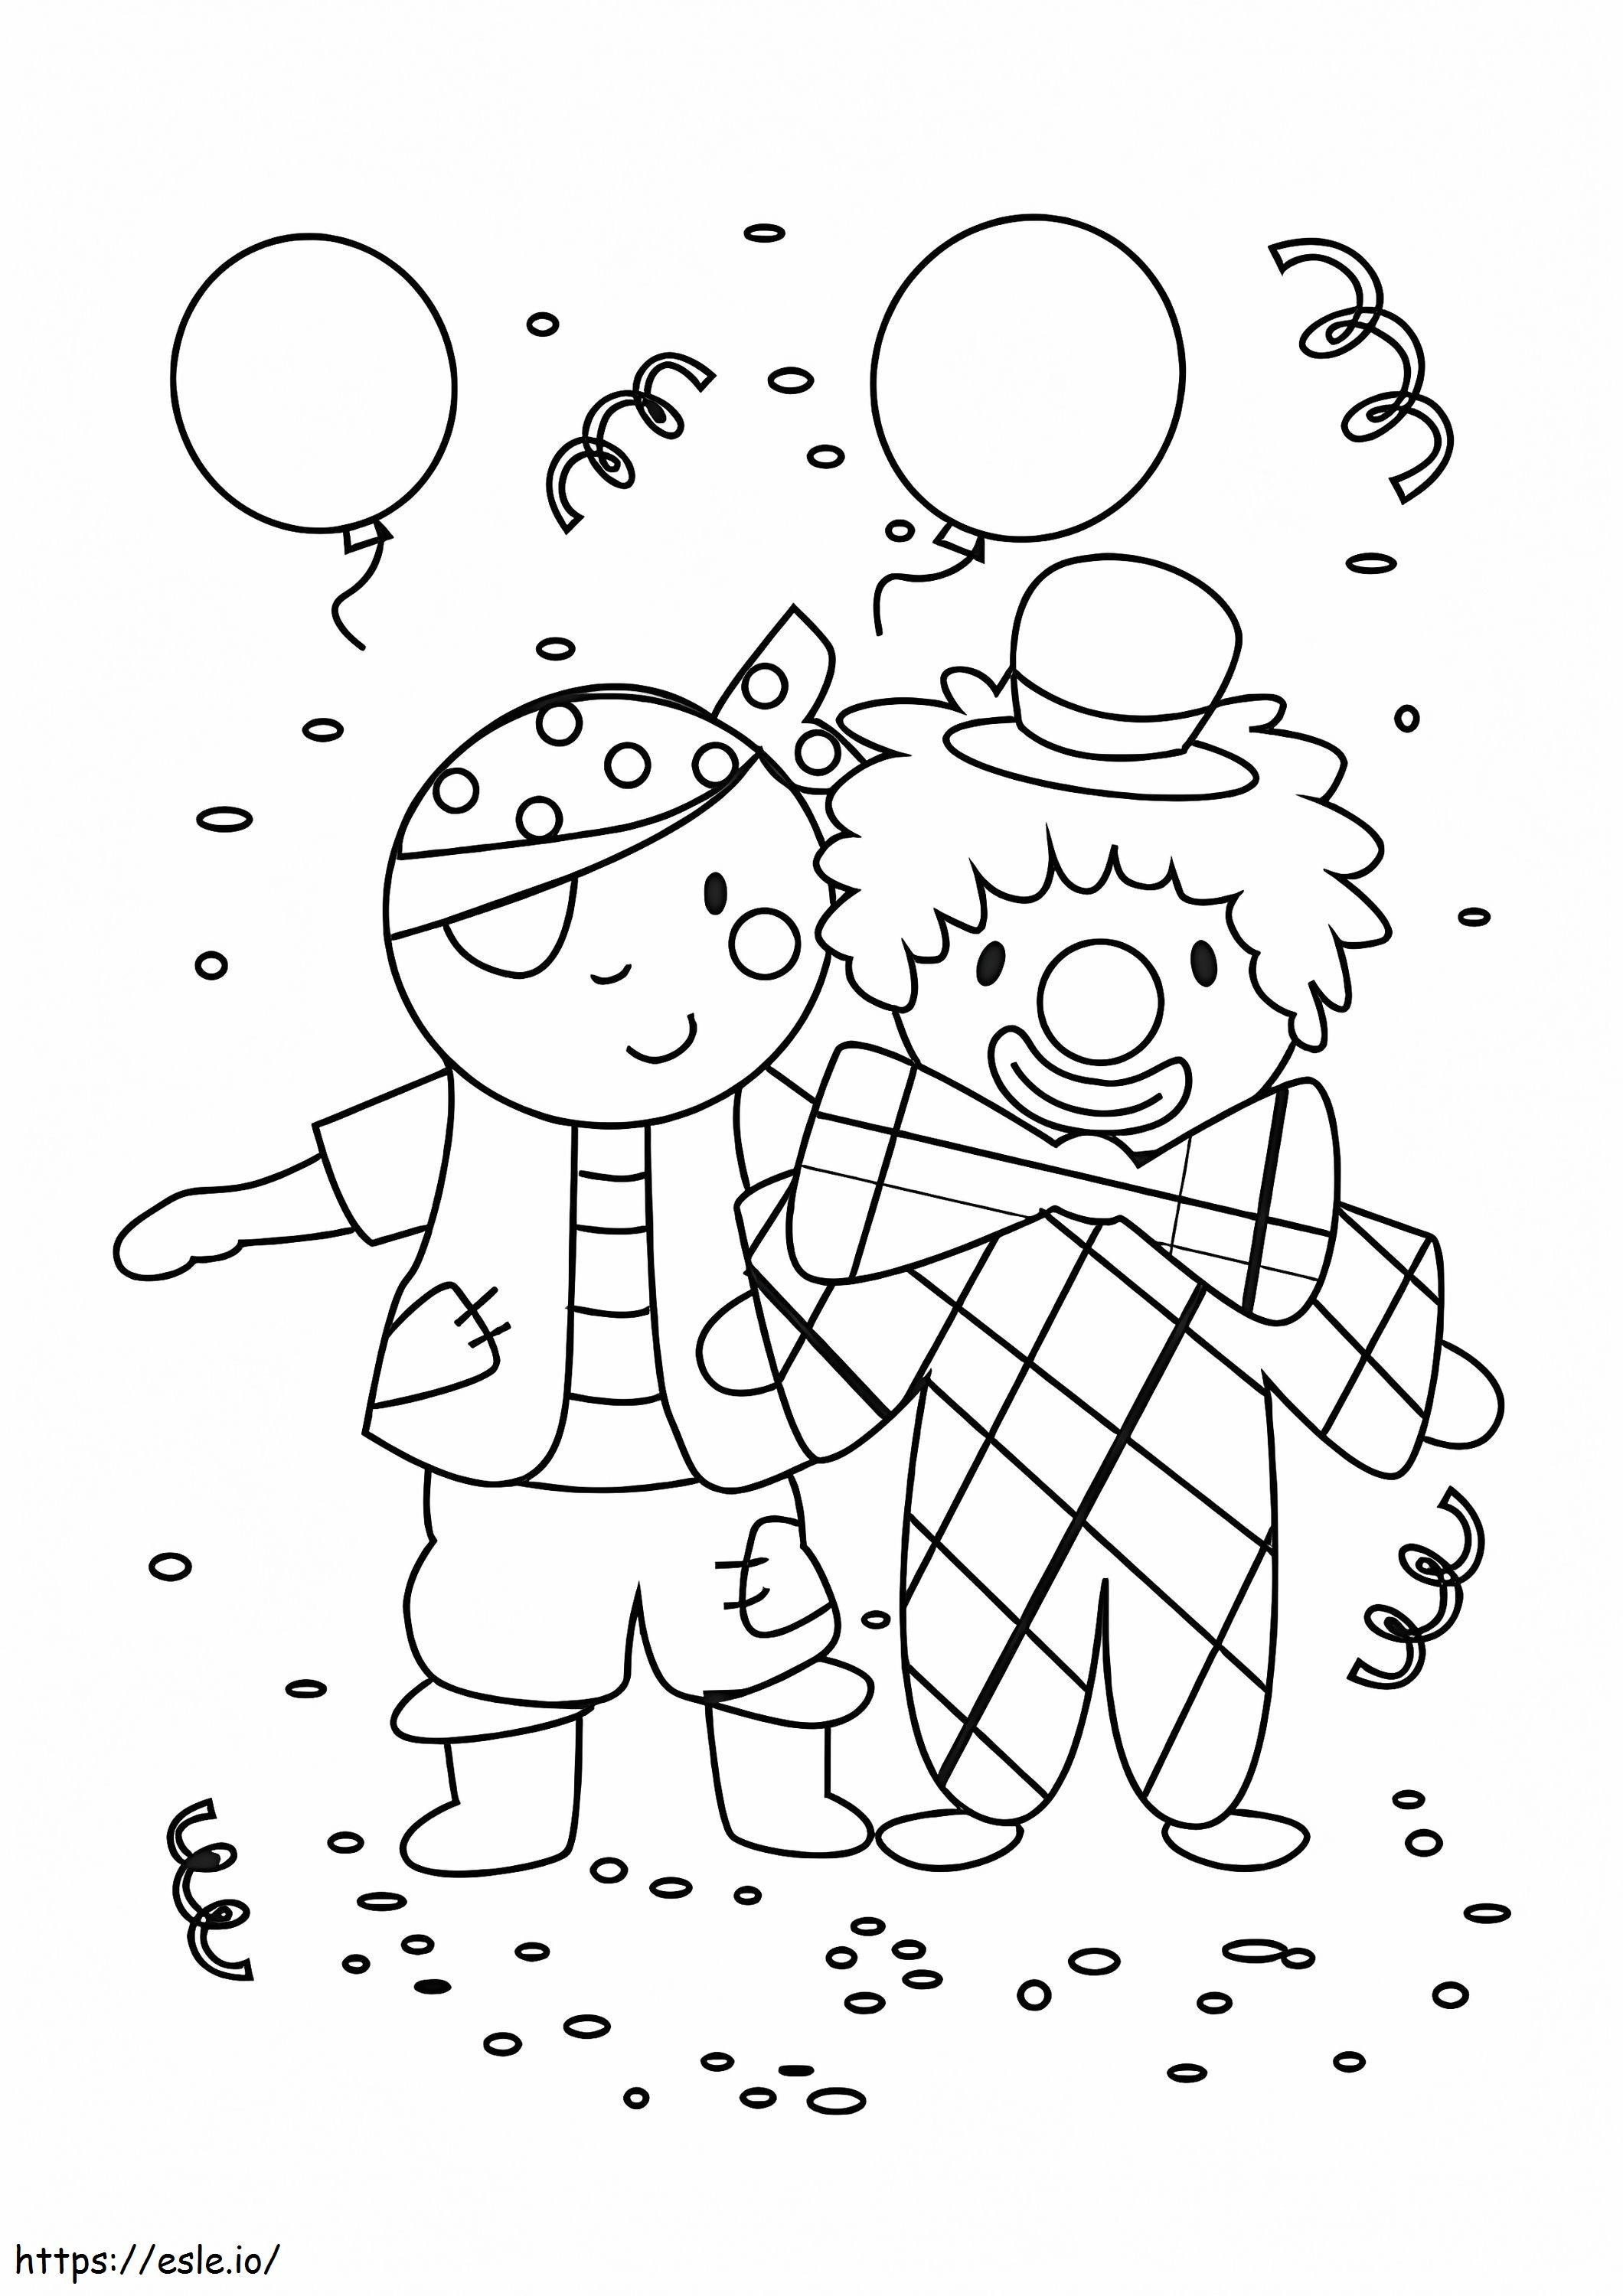 Pirate And Clown Carnival Costumes coloring page